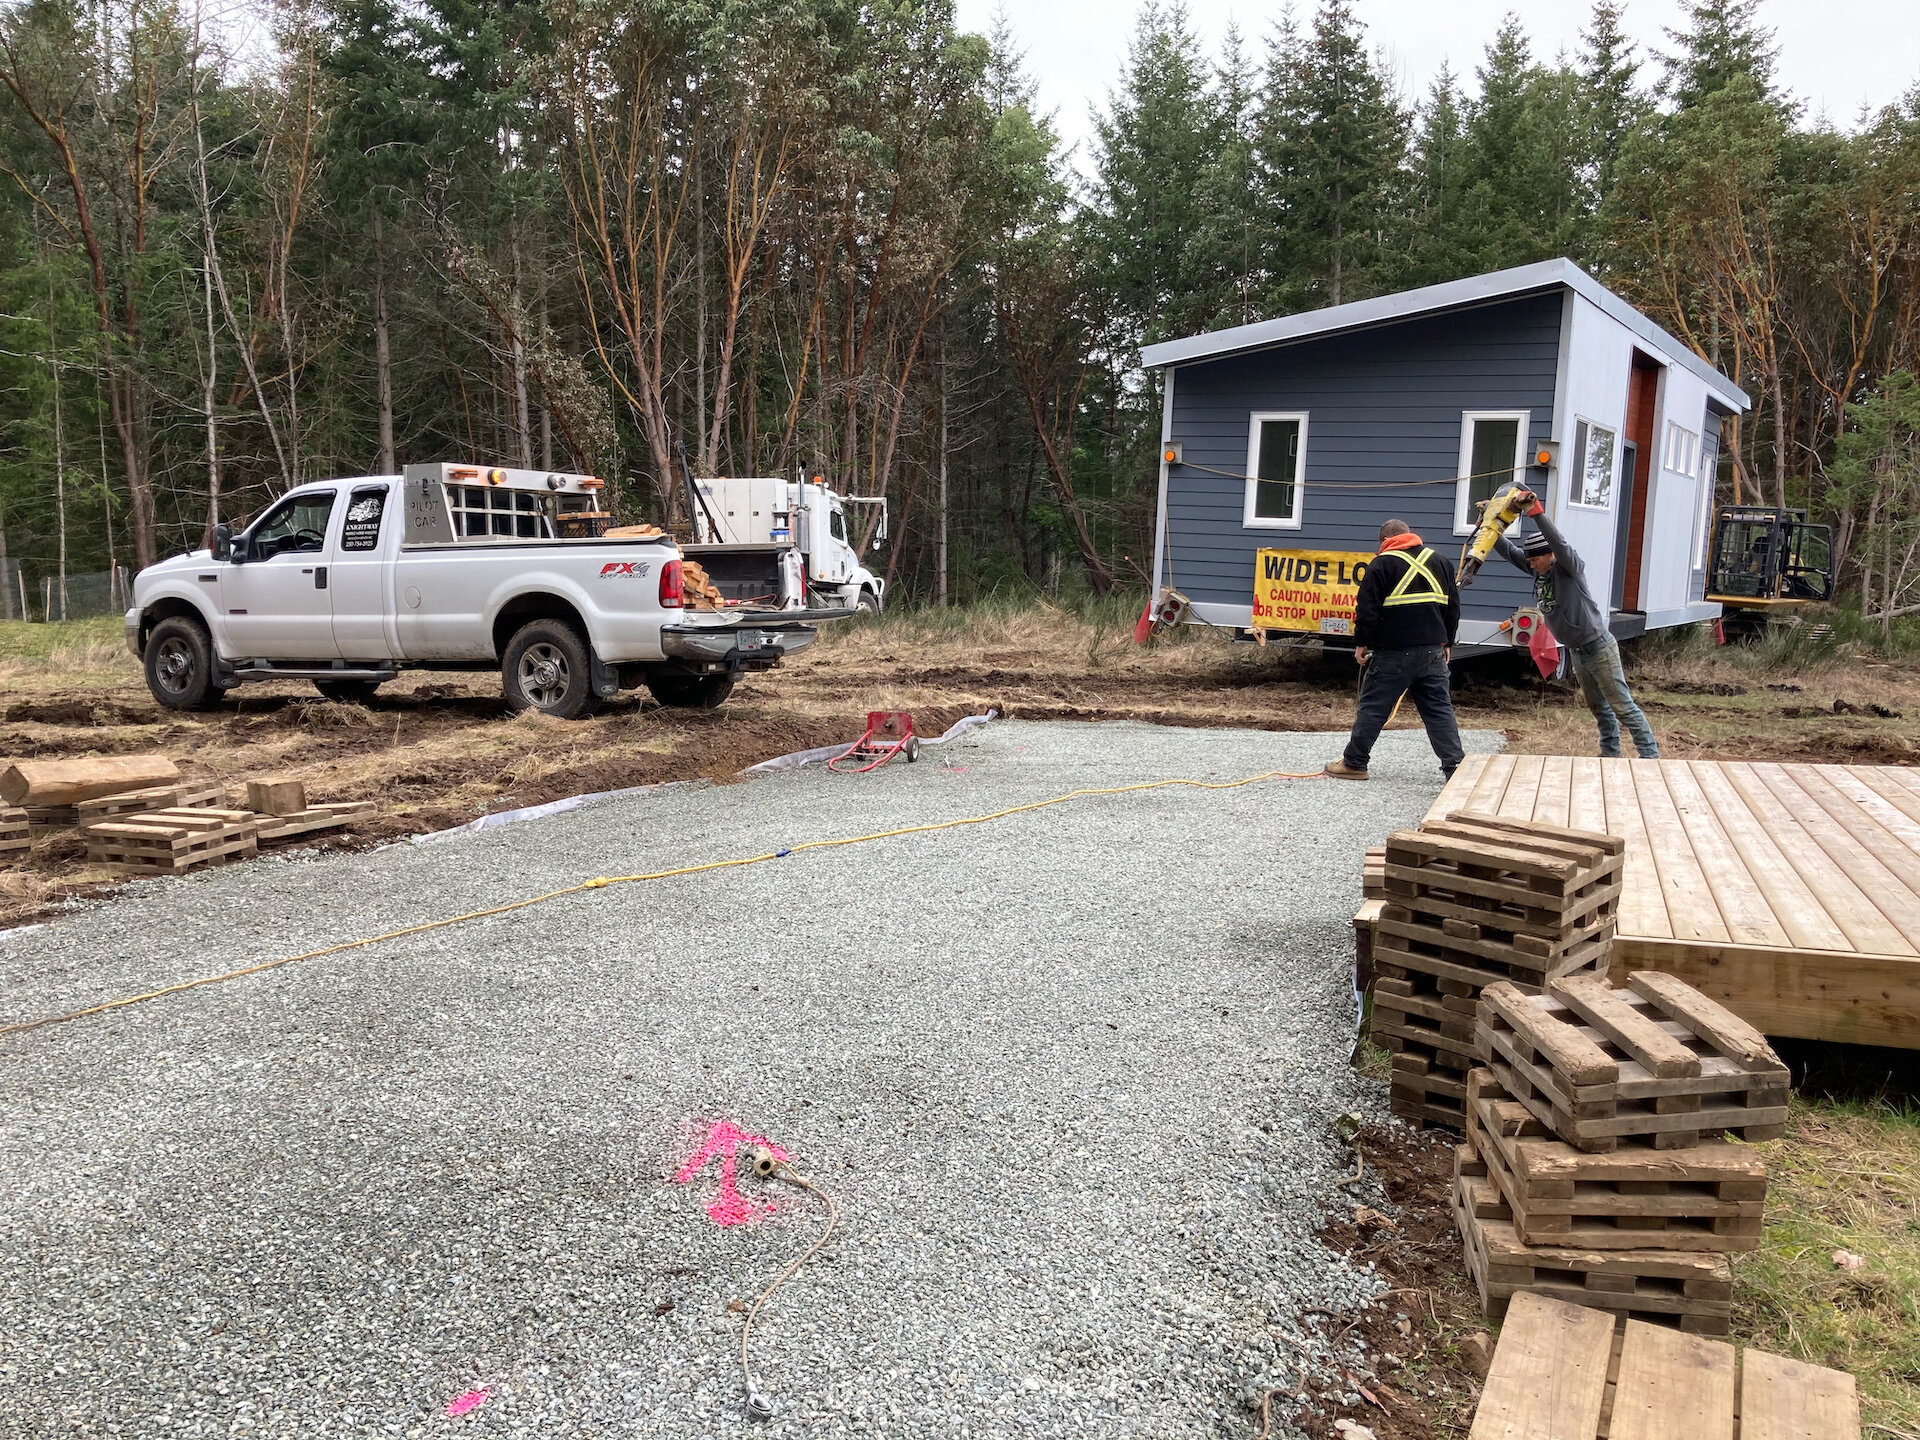  The pink spray paint is where they installed the seismic tie-downs. The guys in the background are using a long jackhammer to to drive “harpoons” 3’ into the ground for added stabilization.  